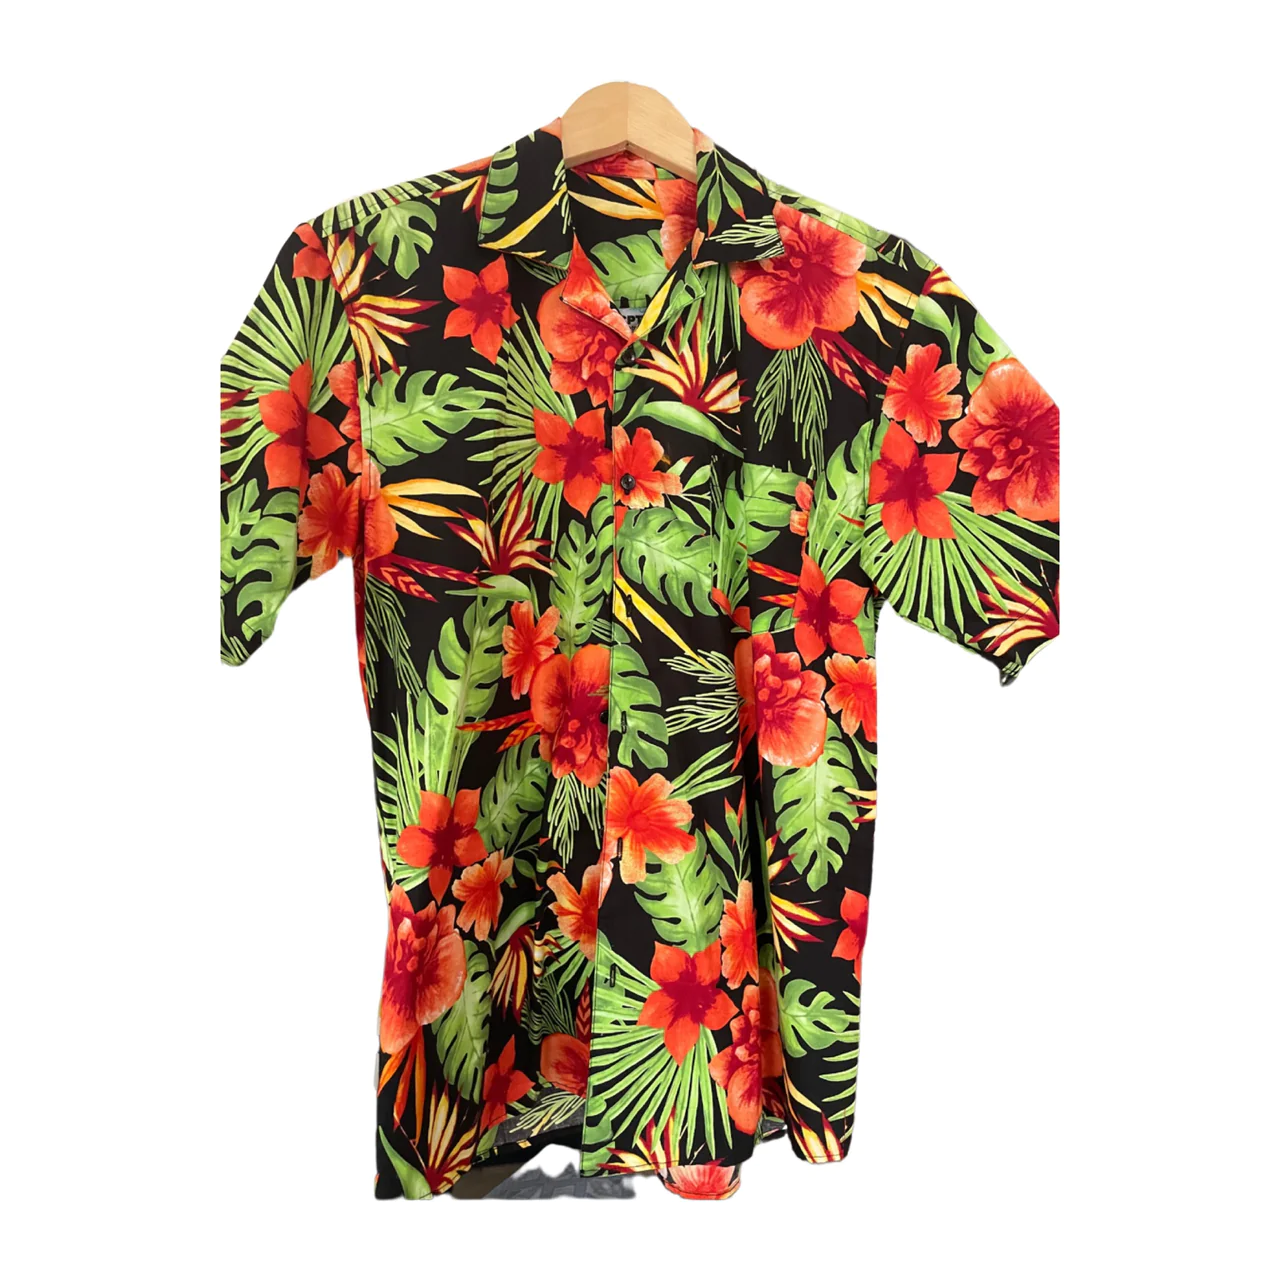 CPTN The Green Red Flower shirt